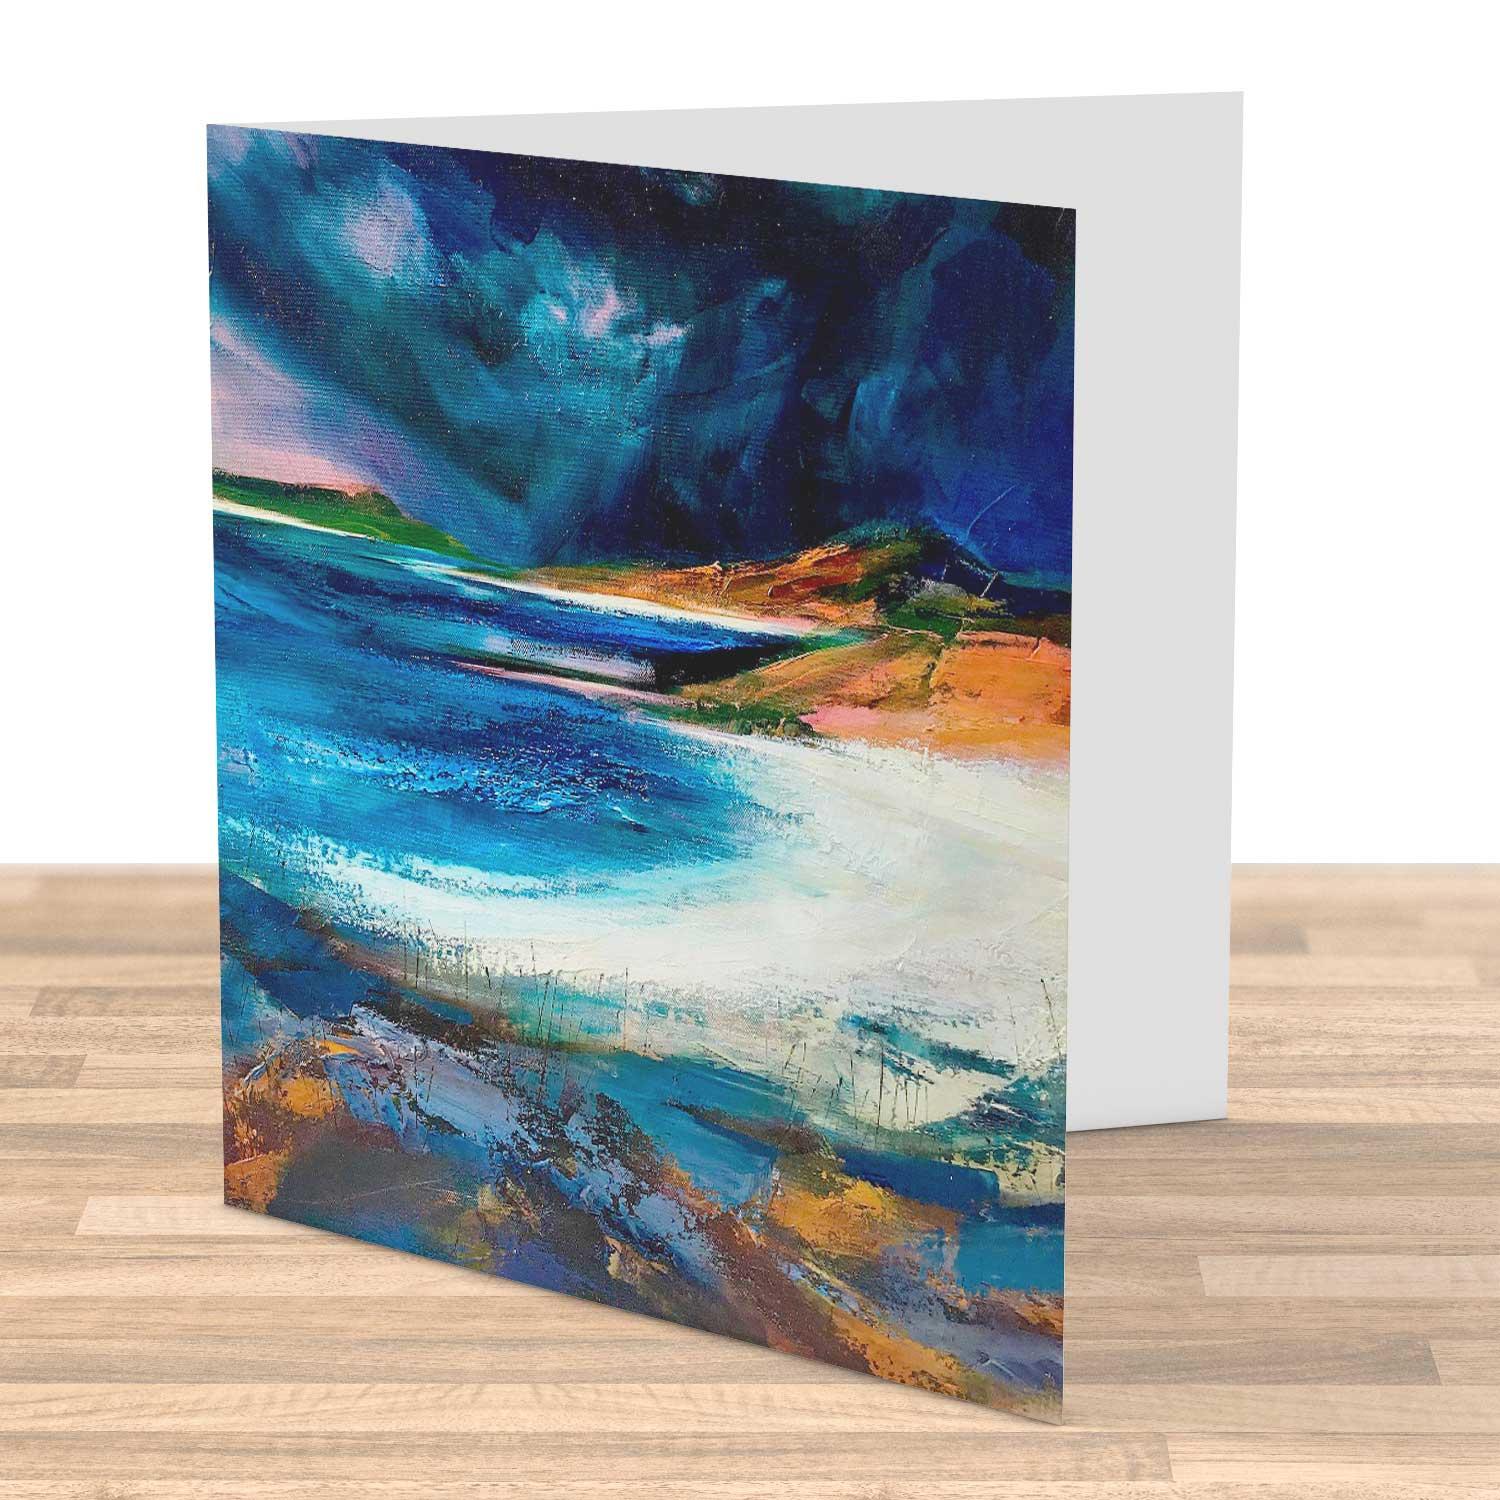 Three Beaches Greeting Card from an original painting by artist Fiona Matheson